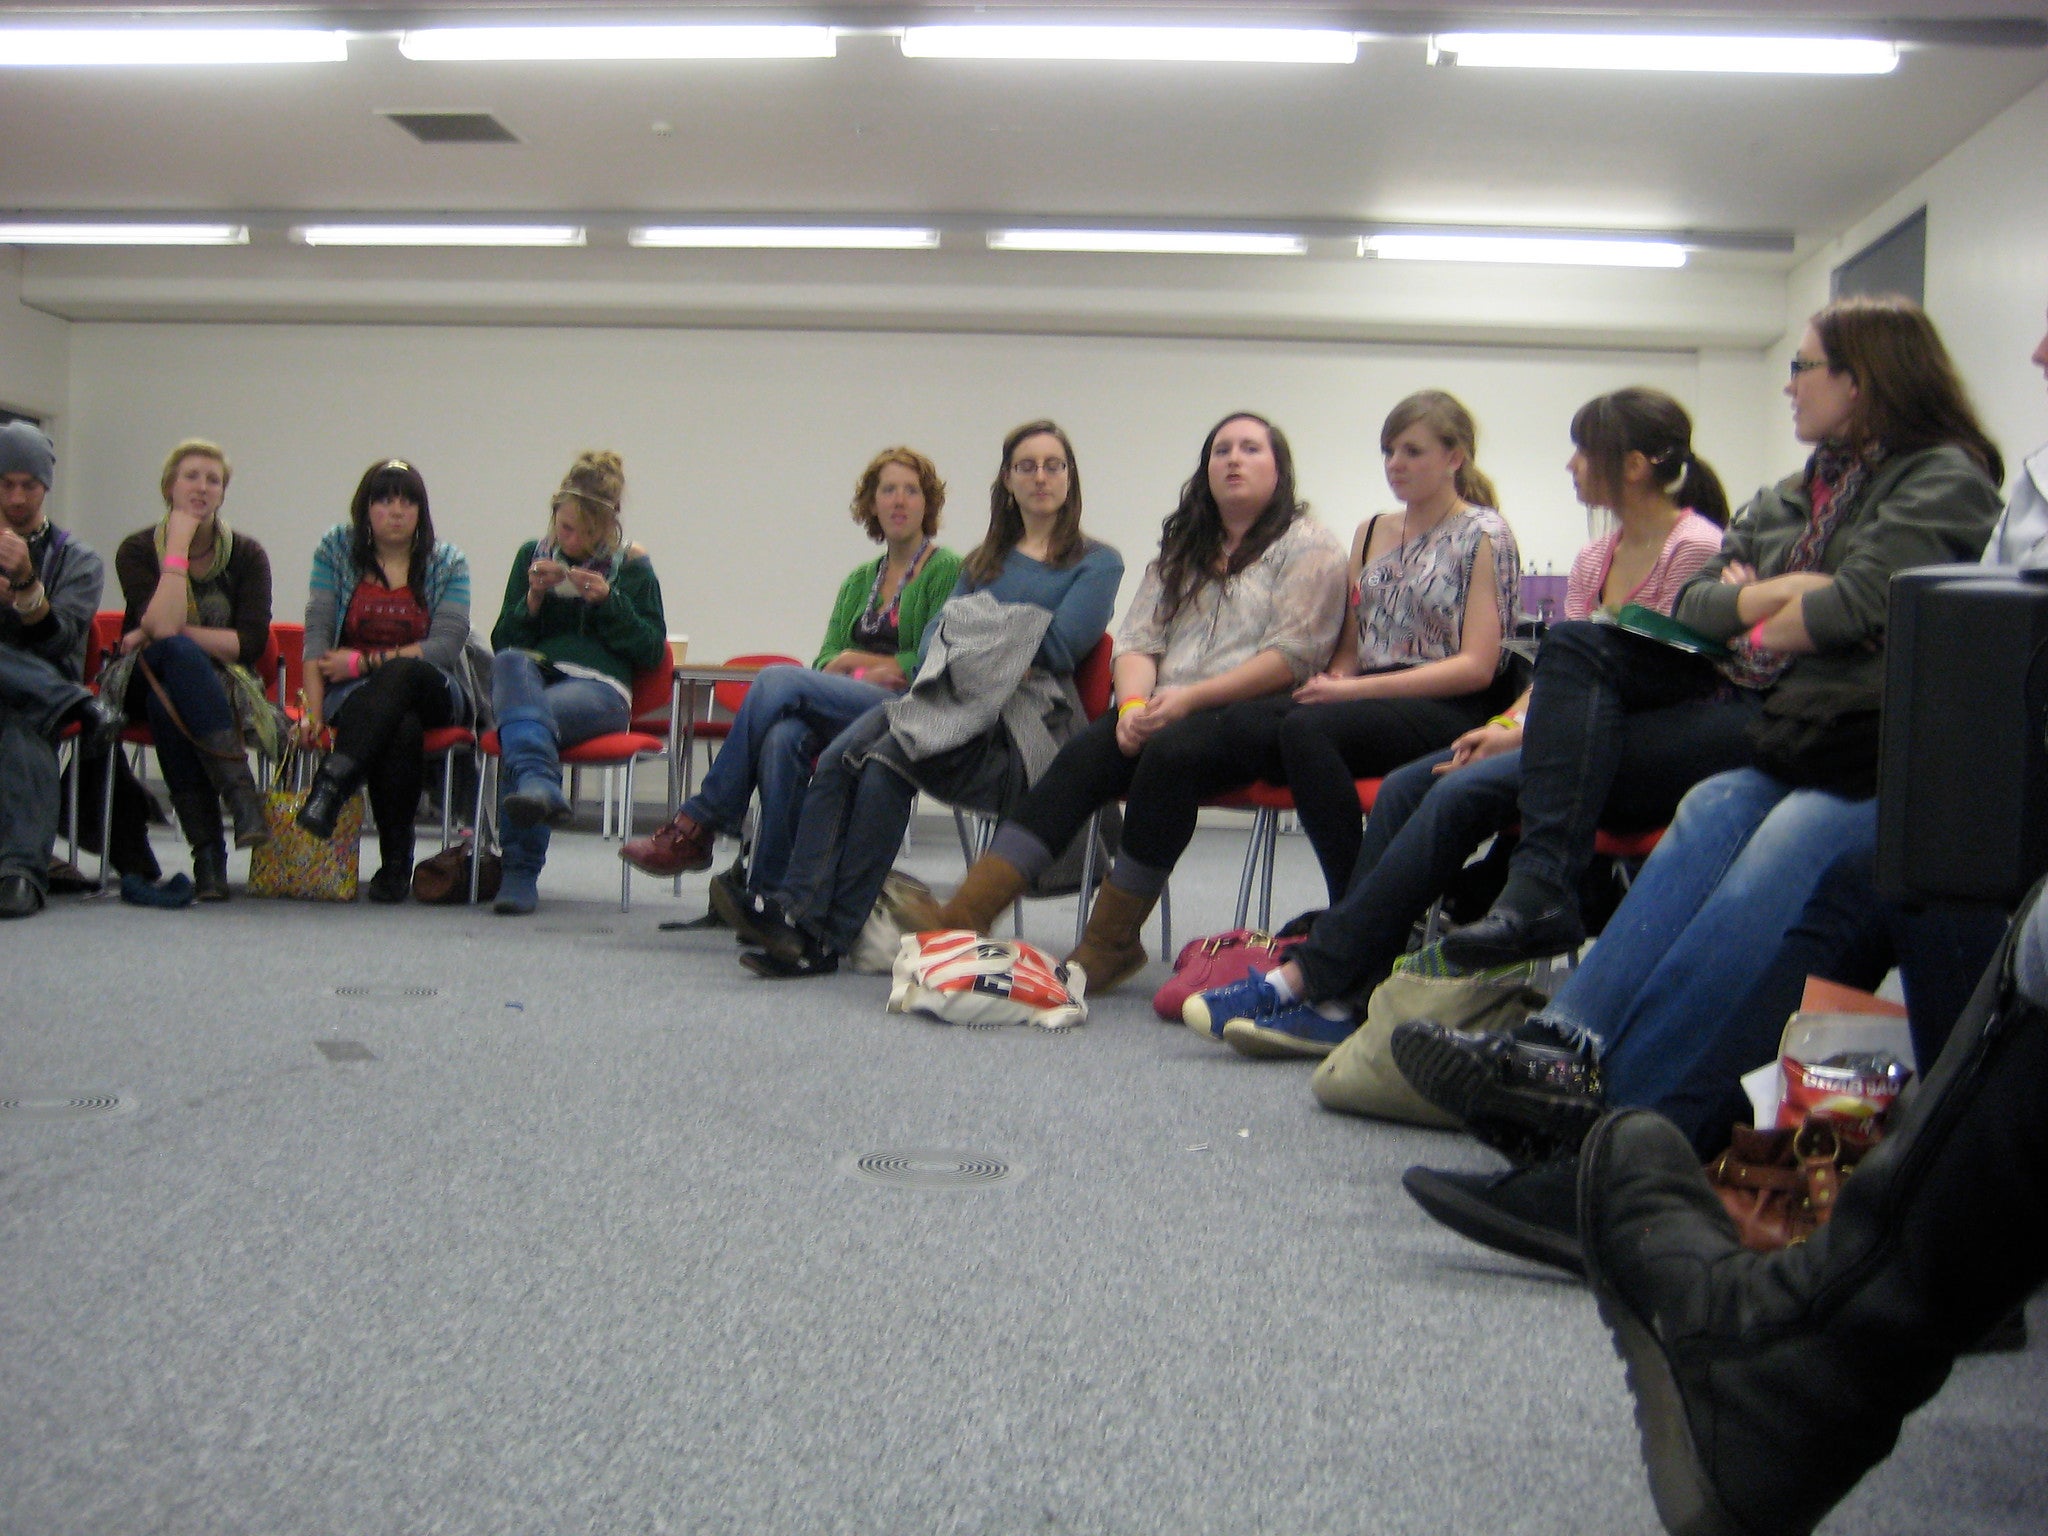 Students in a focus group, seated in a partial circle in the classroom.